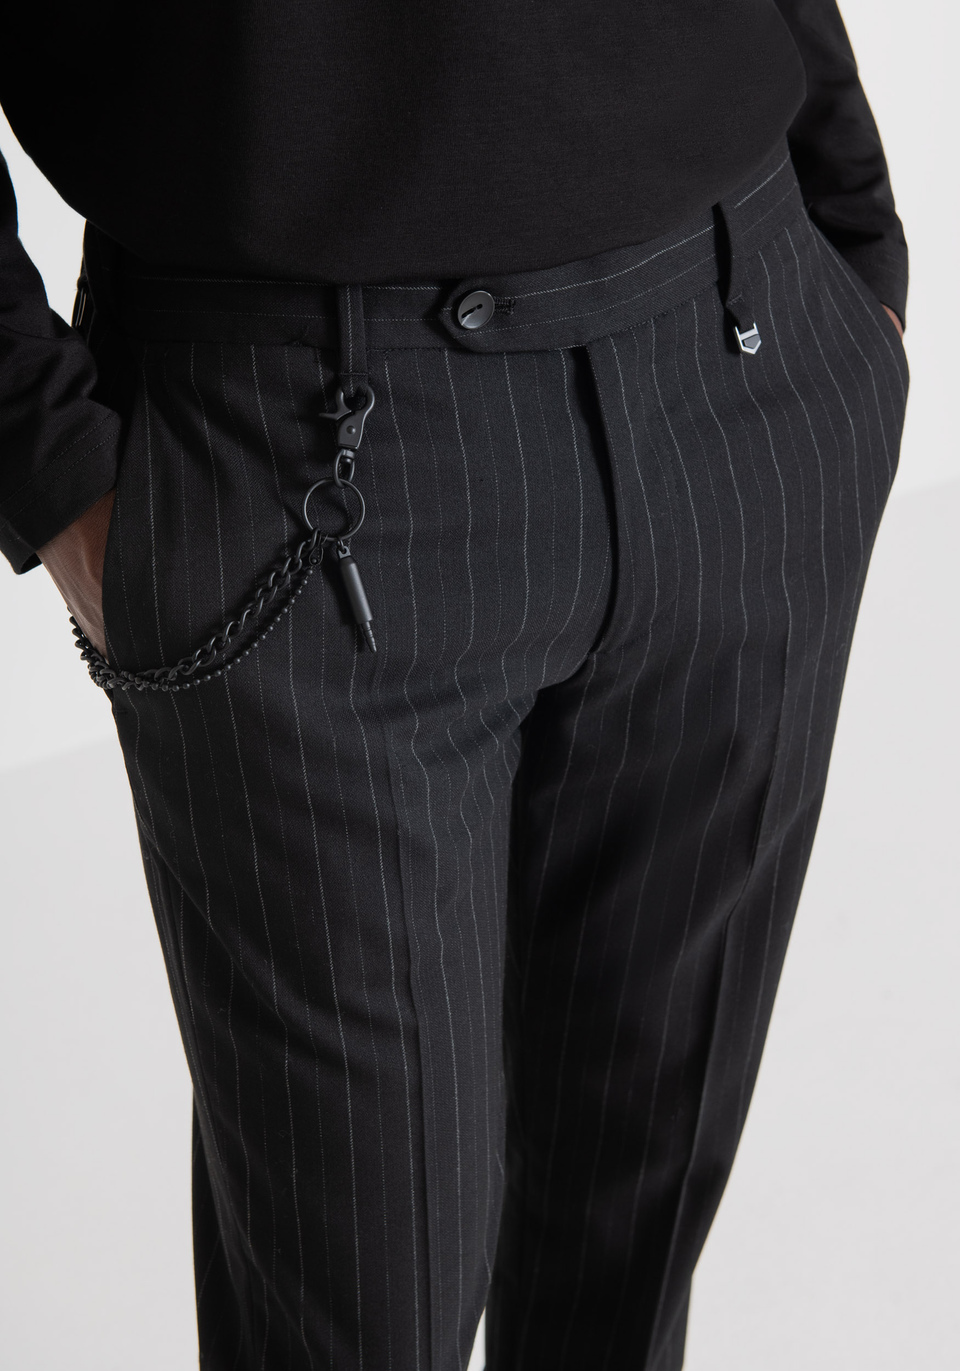 "ROY" SLIM-FIT TROUSERS IN SOFT STRETCH VISCOSE BLEND WITH PINSTRIPE PATTERN - Antony Morato Online Shop